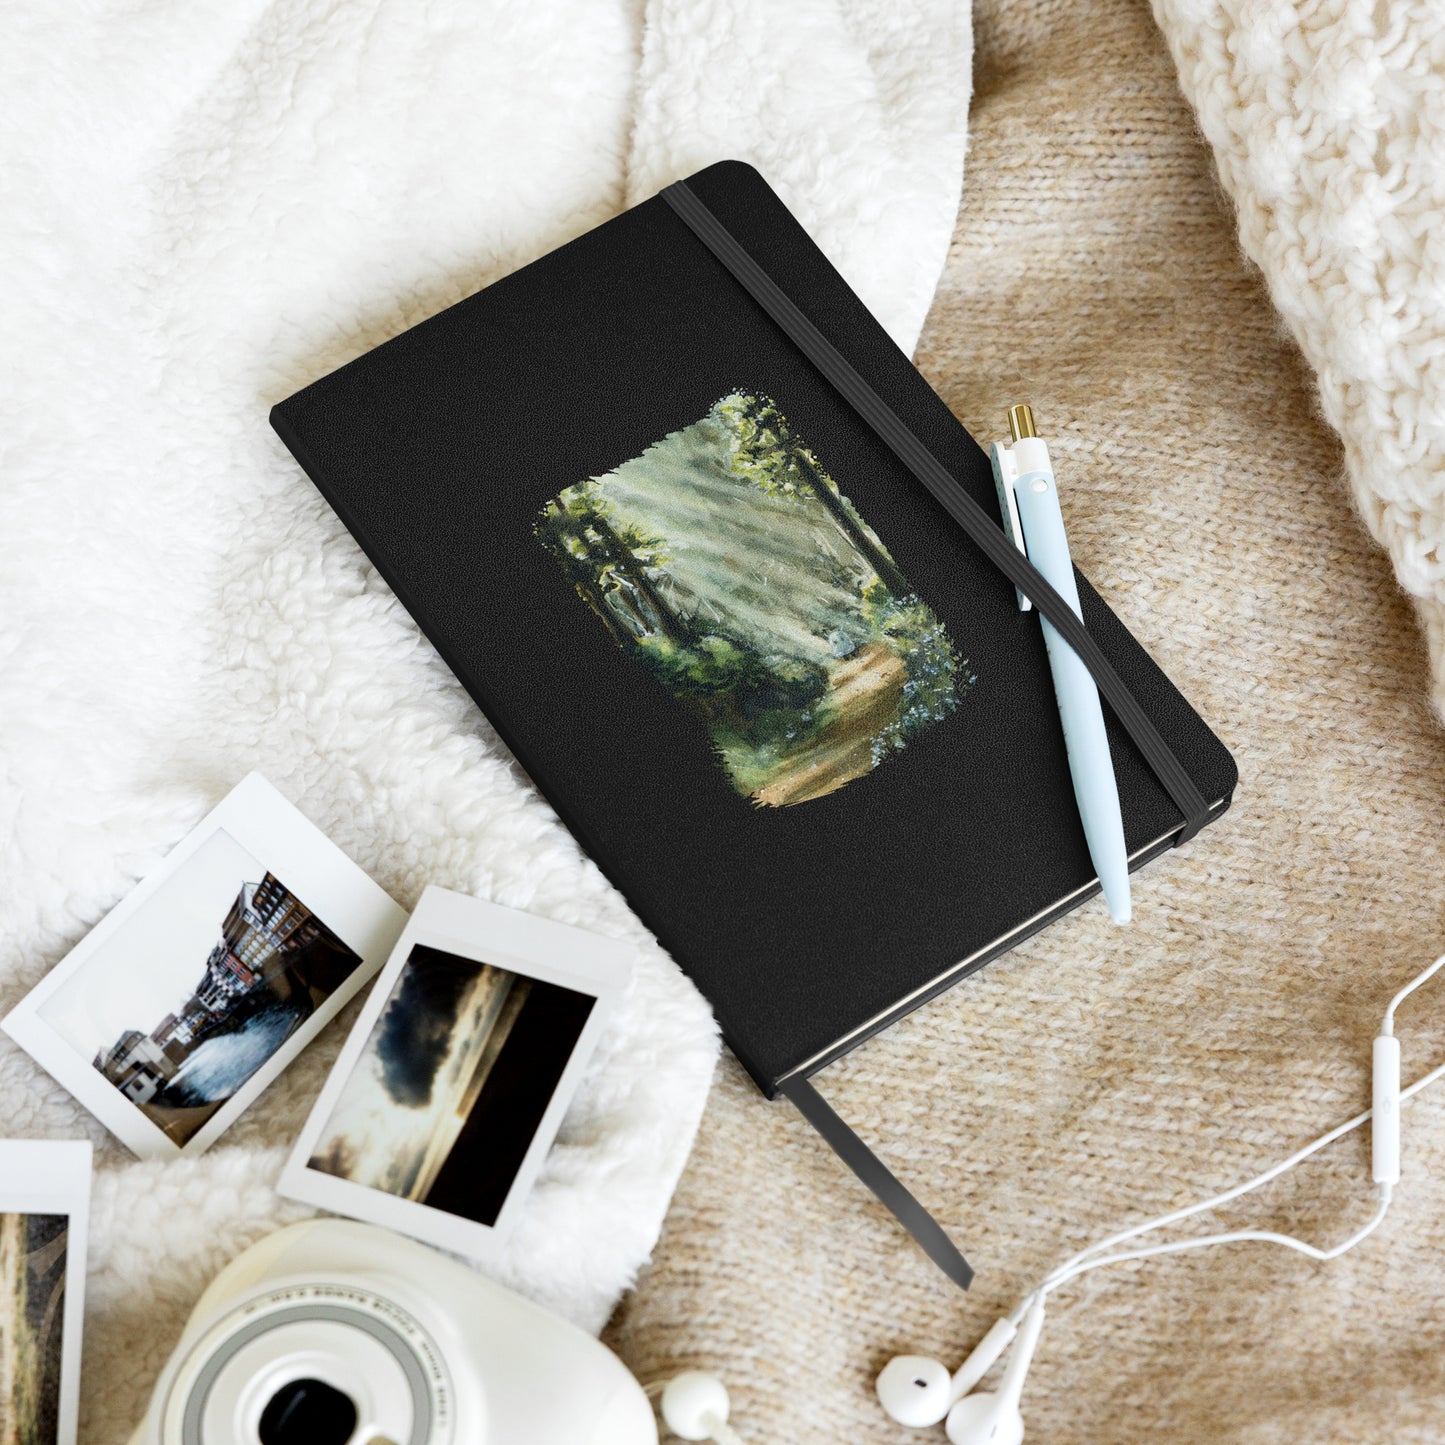 Forget-me-not Forest Sprite - Hardcover Bound Notebook